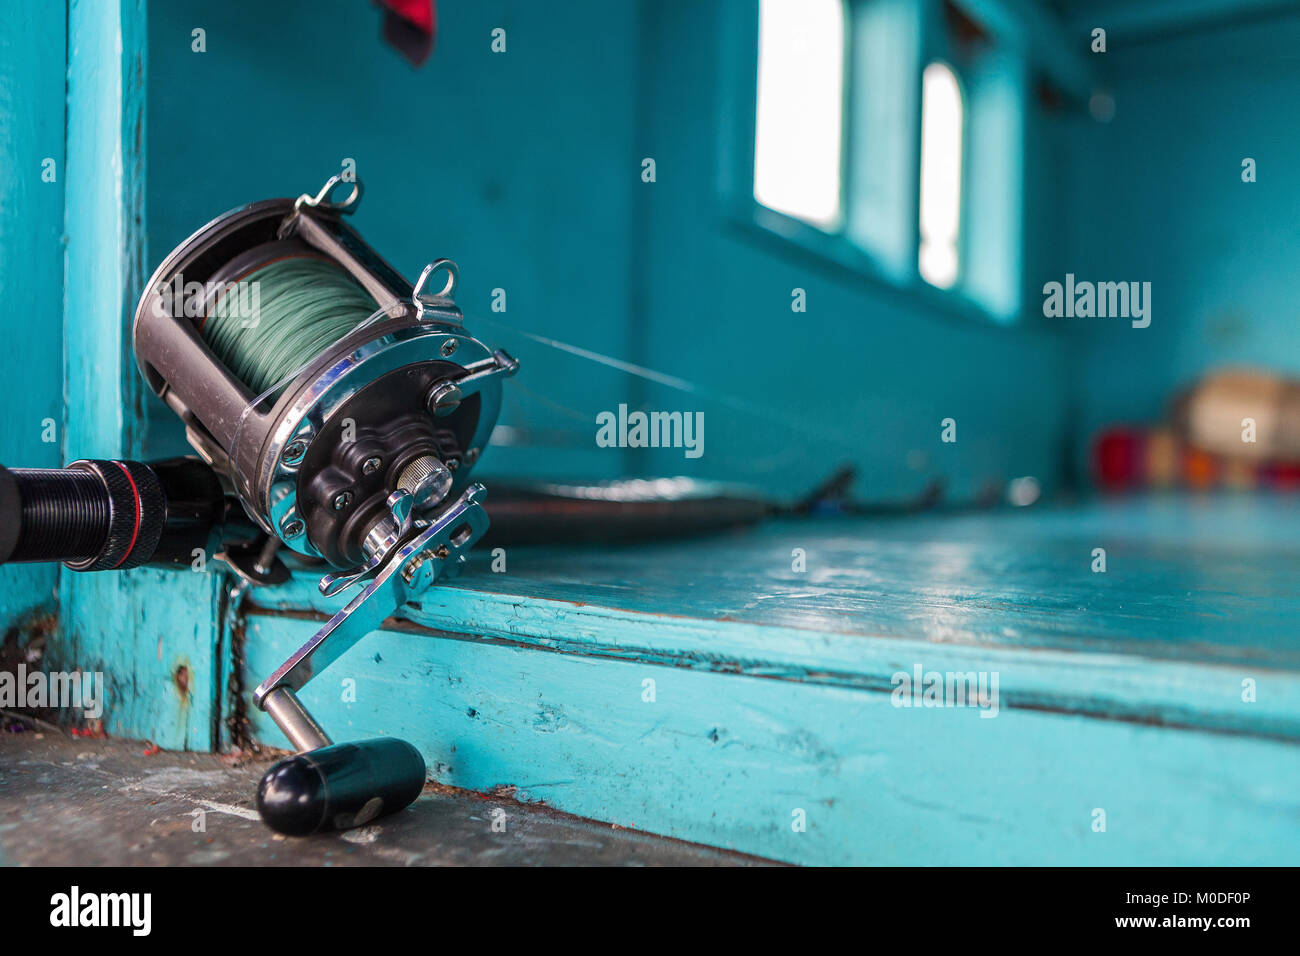 Fishing gear in the Garret on the boat Stock Photo